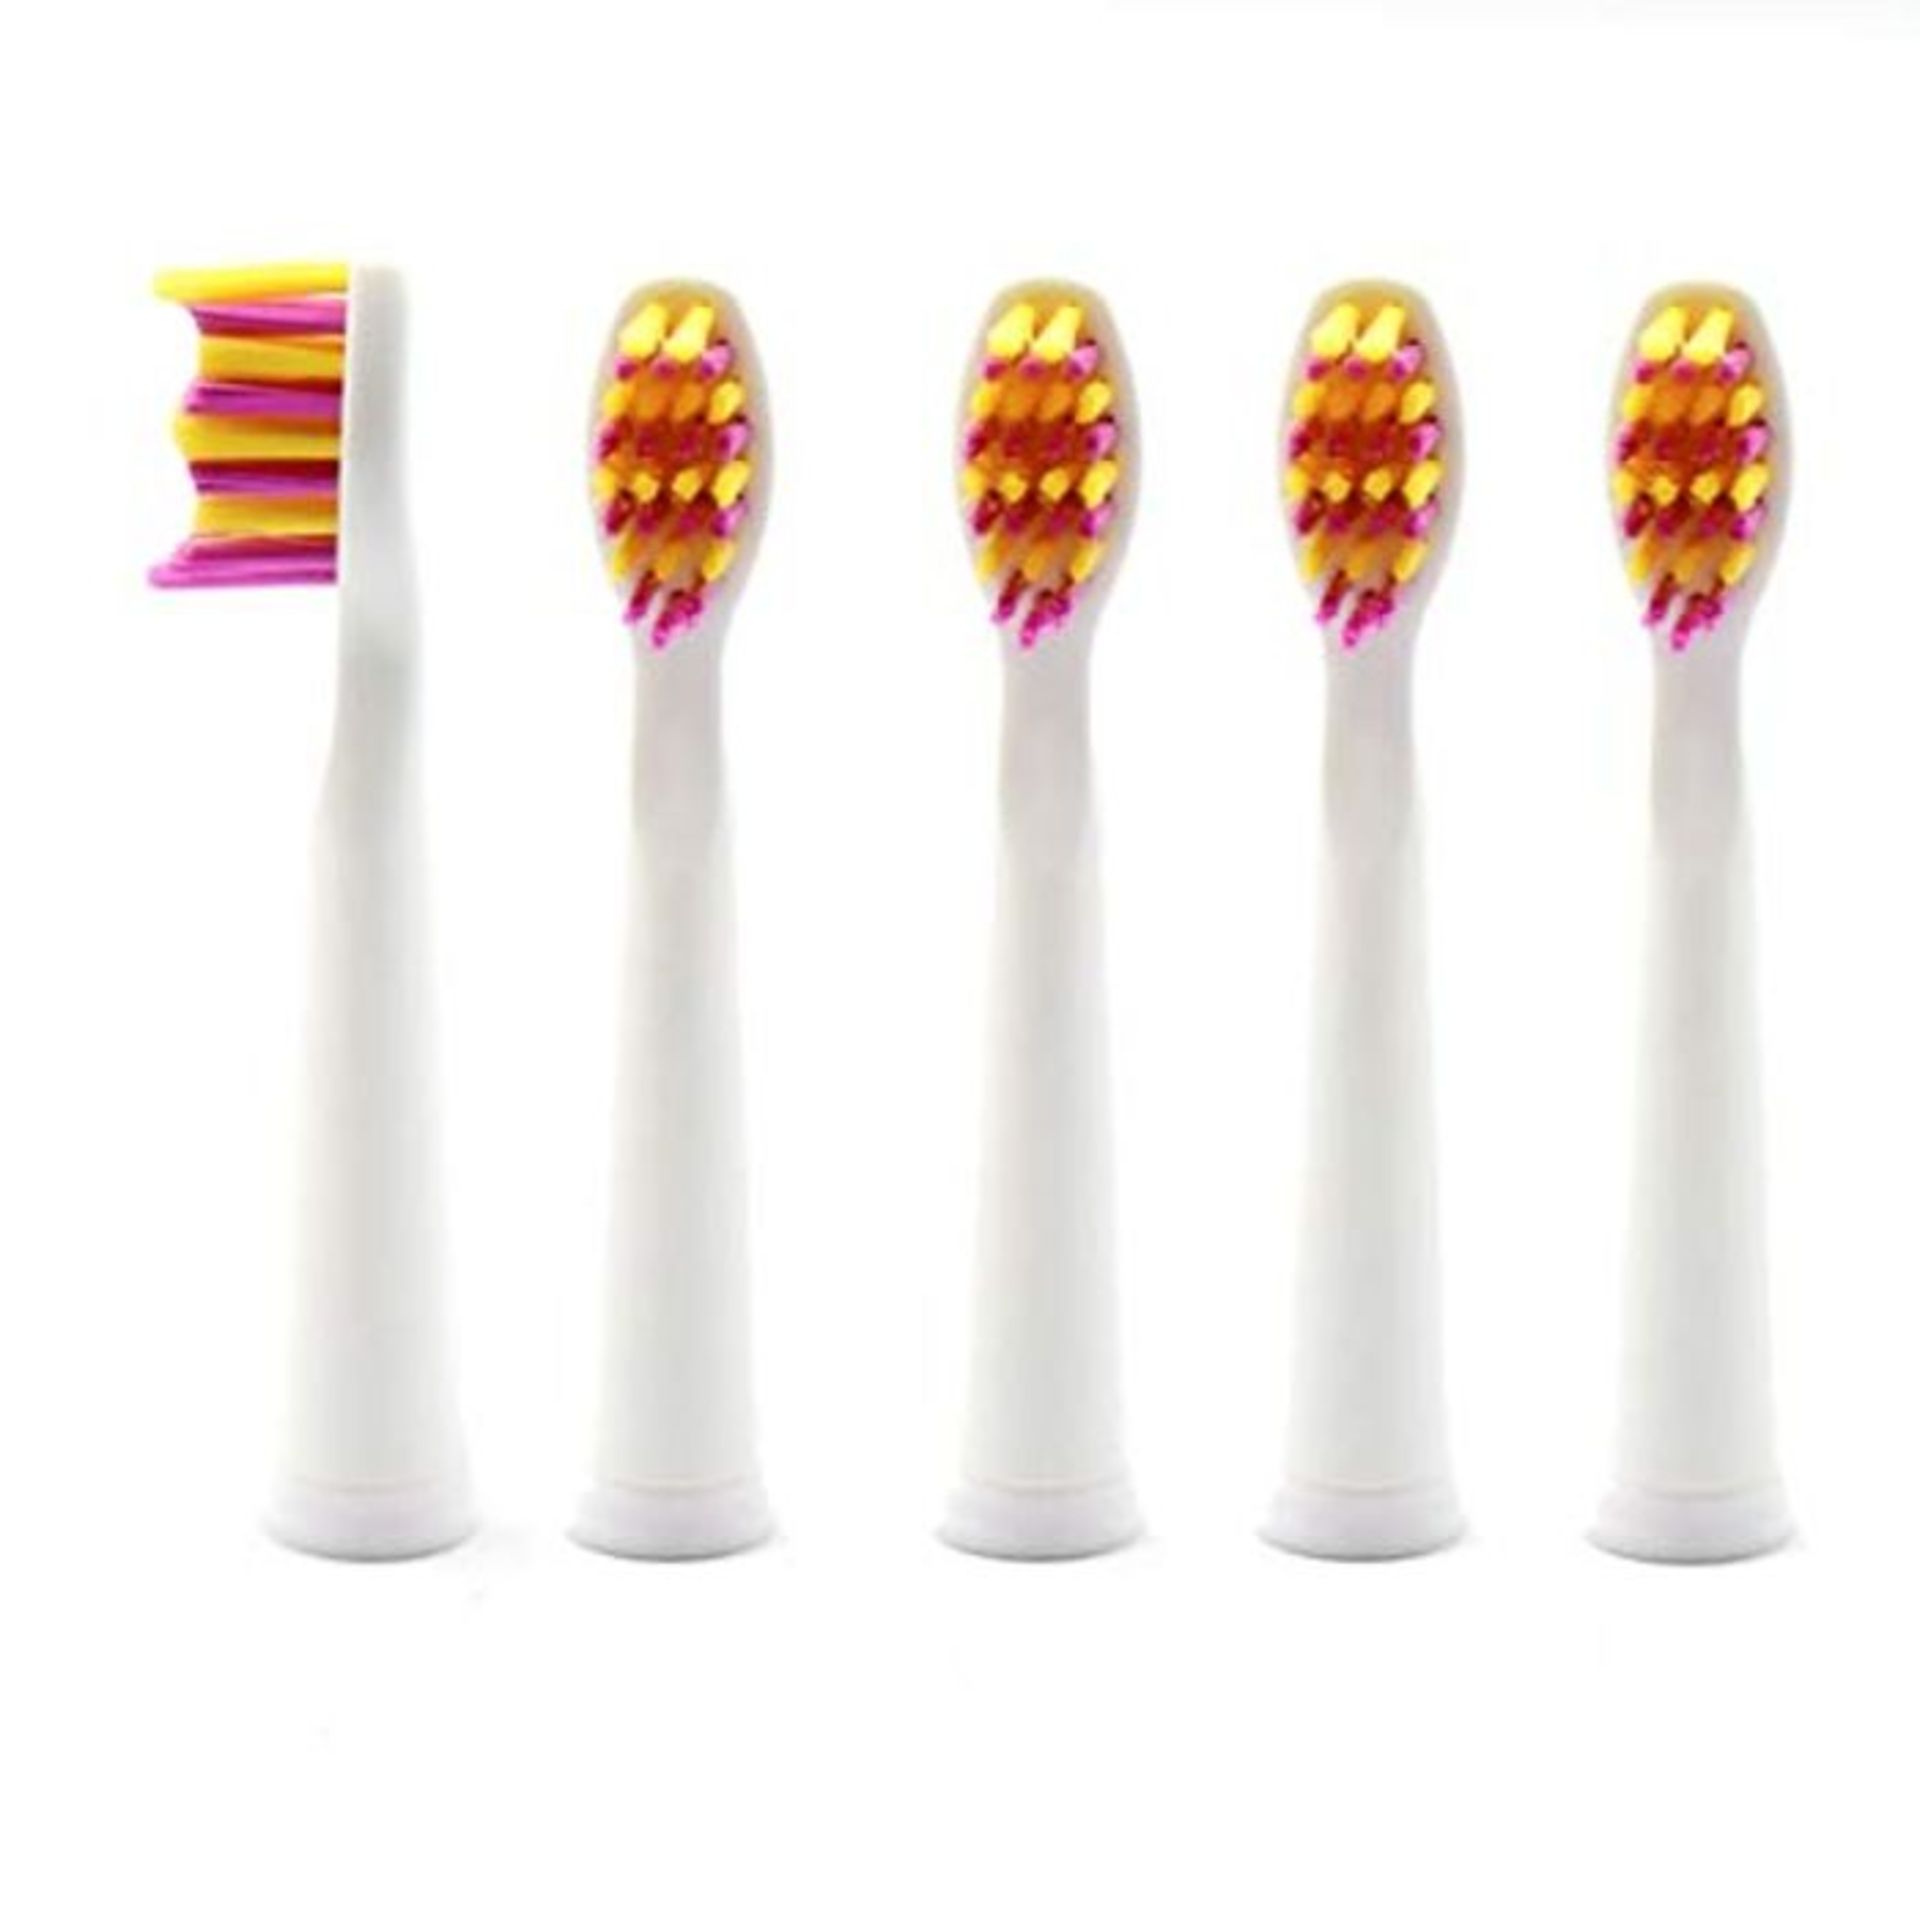 Seago Electric Toothbrush Replacement Heads for Model SG-507B, SG-949, White- Pack of